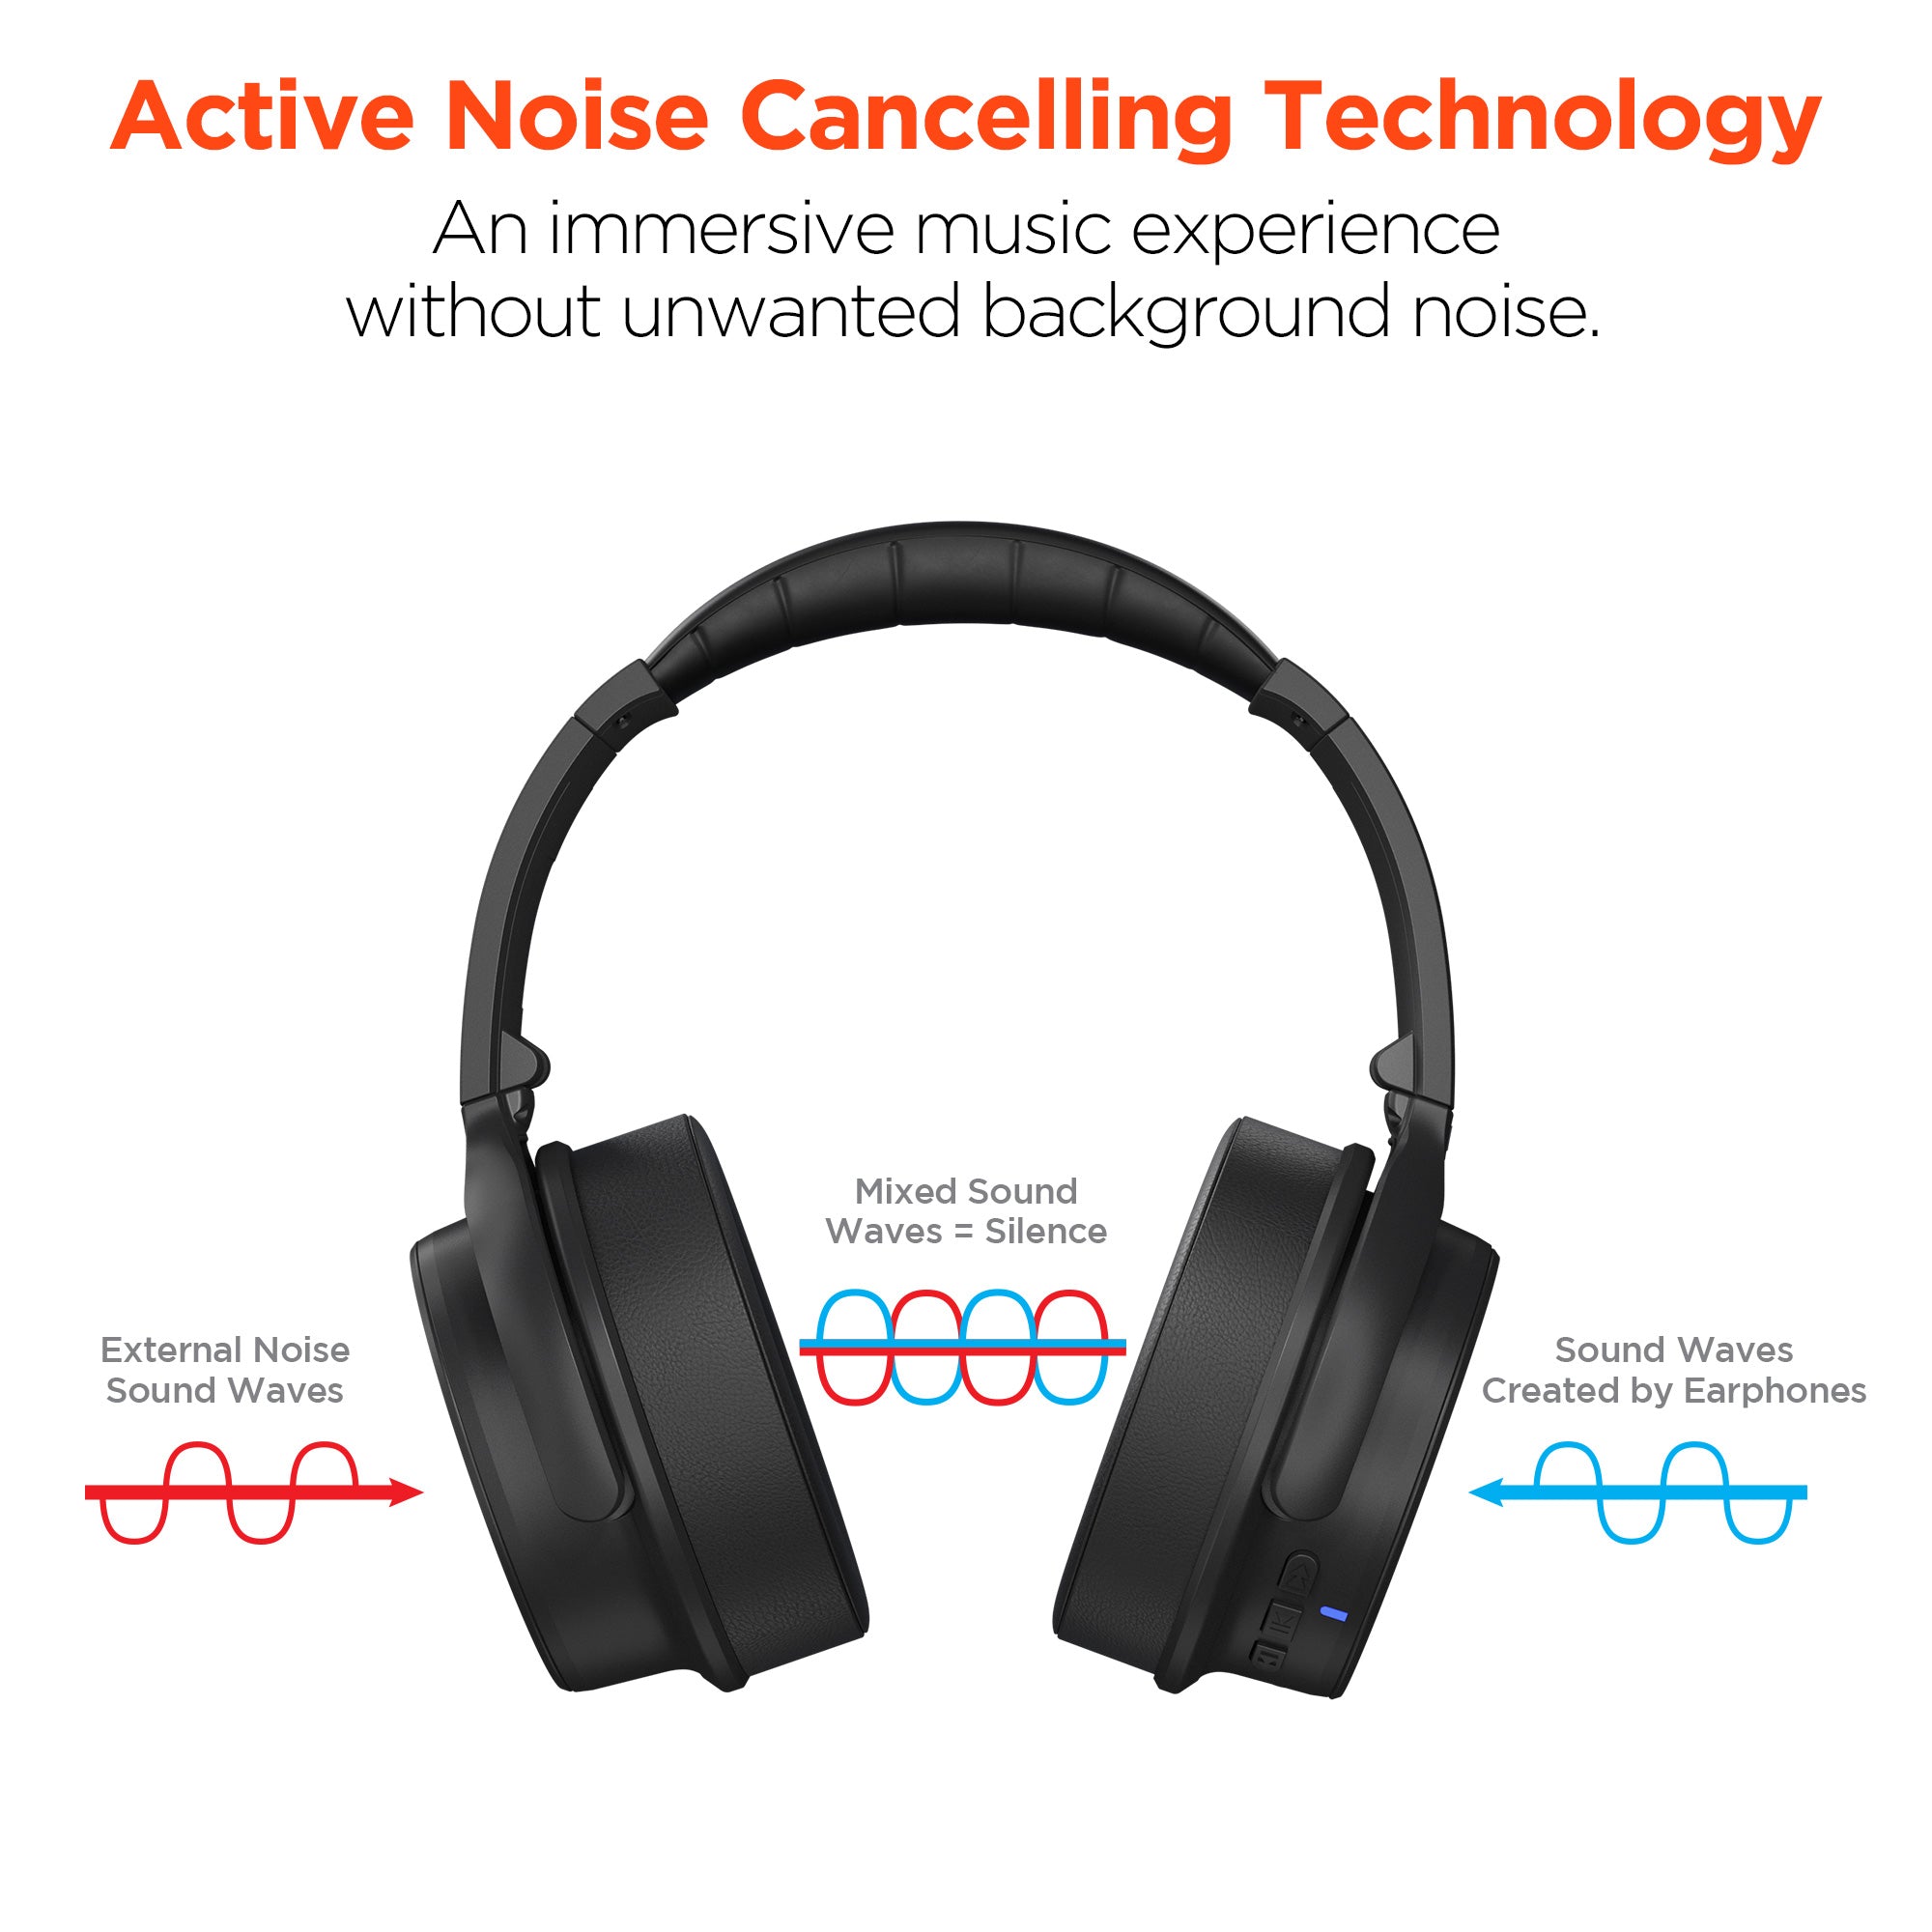 Wireless Headphones - ANC Noise-Cancelling